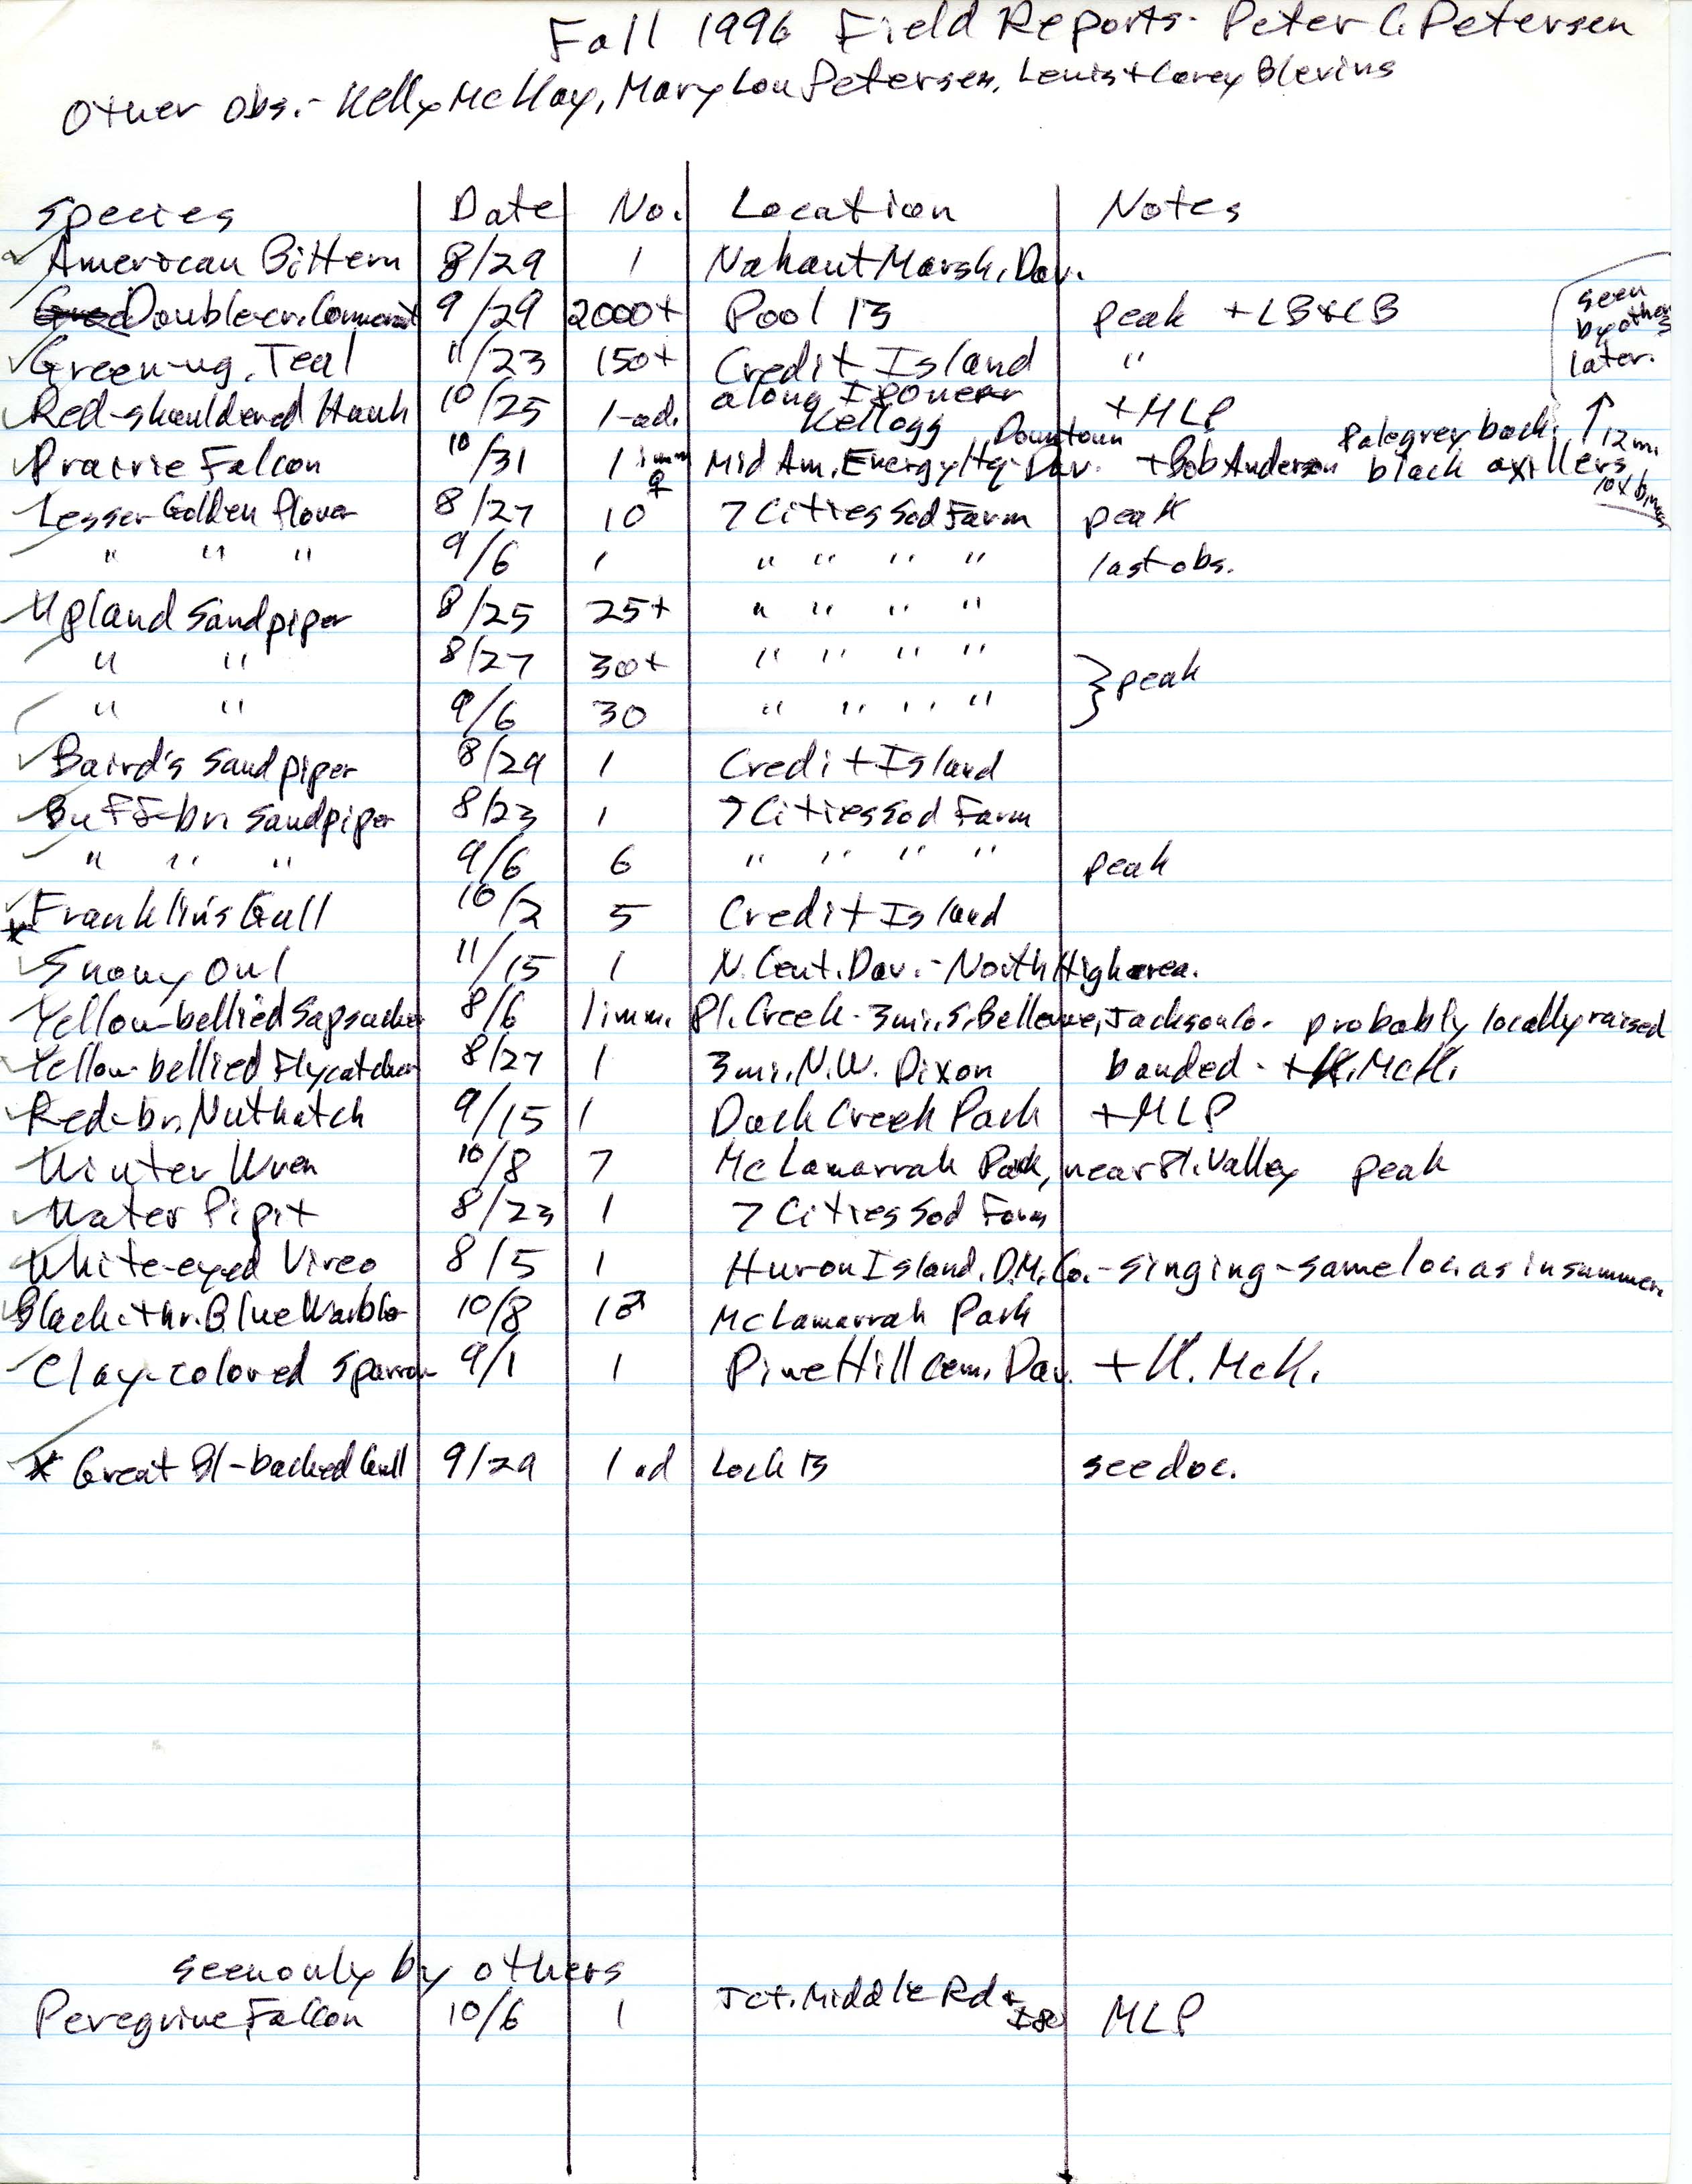 Field notes contributed by Peter C. Petersen, fall 1996